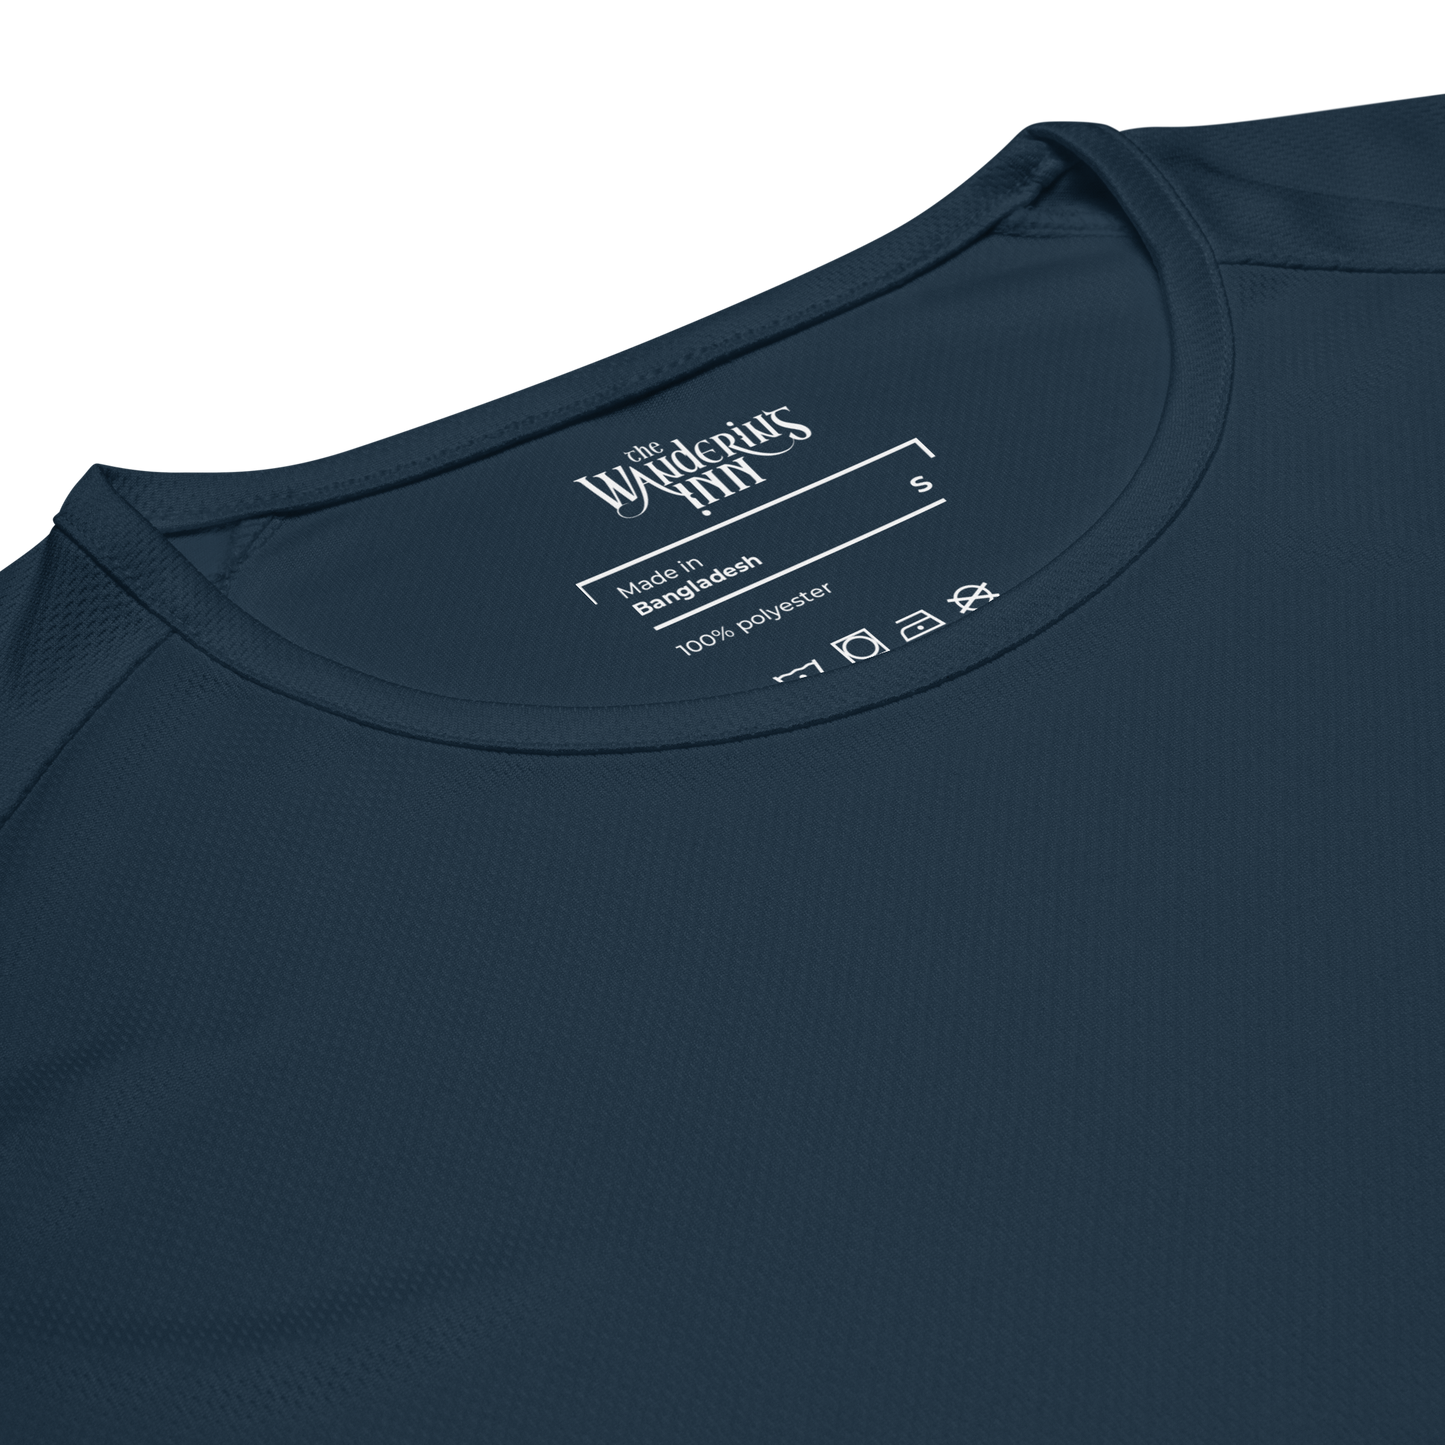 Runners Guild Athletic Jersey (Unisex)